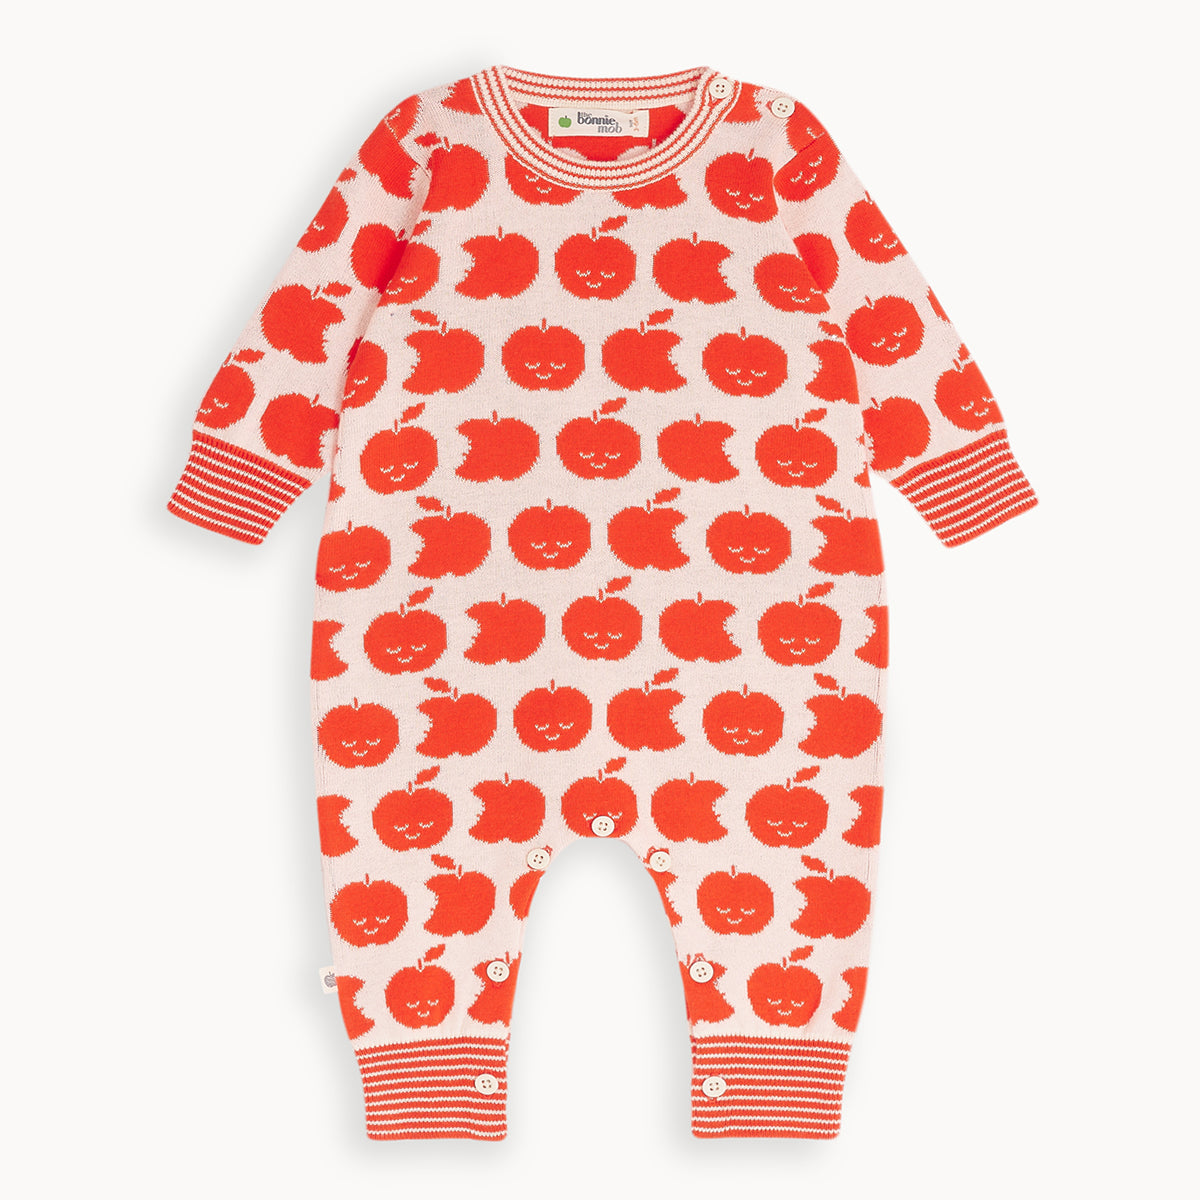 The Bonnie Mob The Bonnie Mob Skittle Apple Knit Playsuit